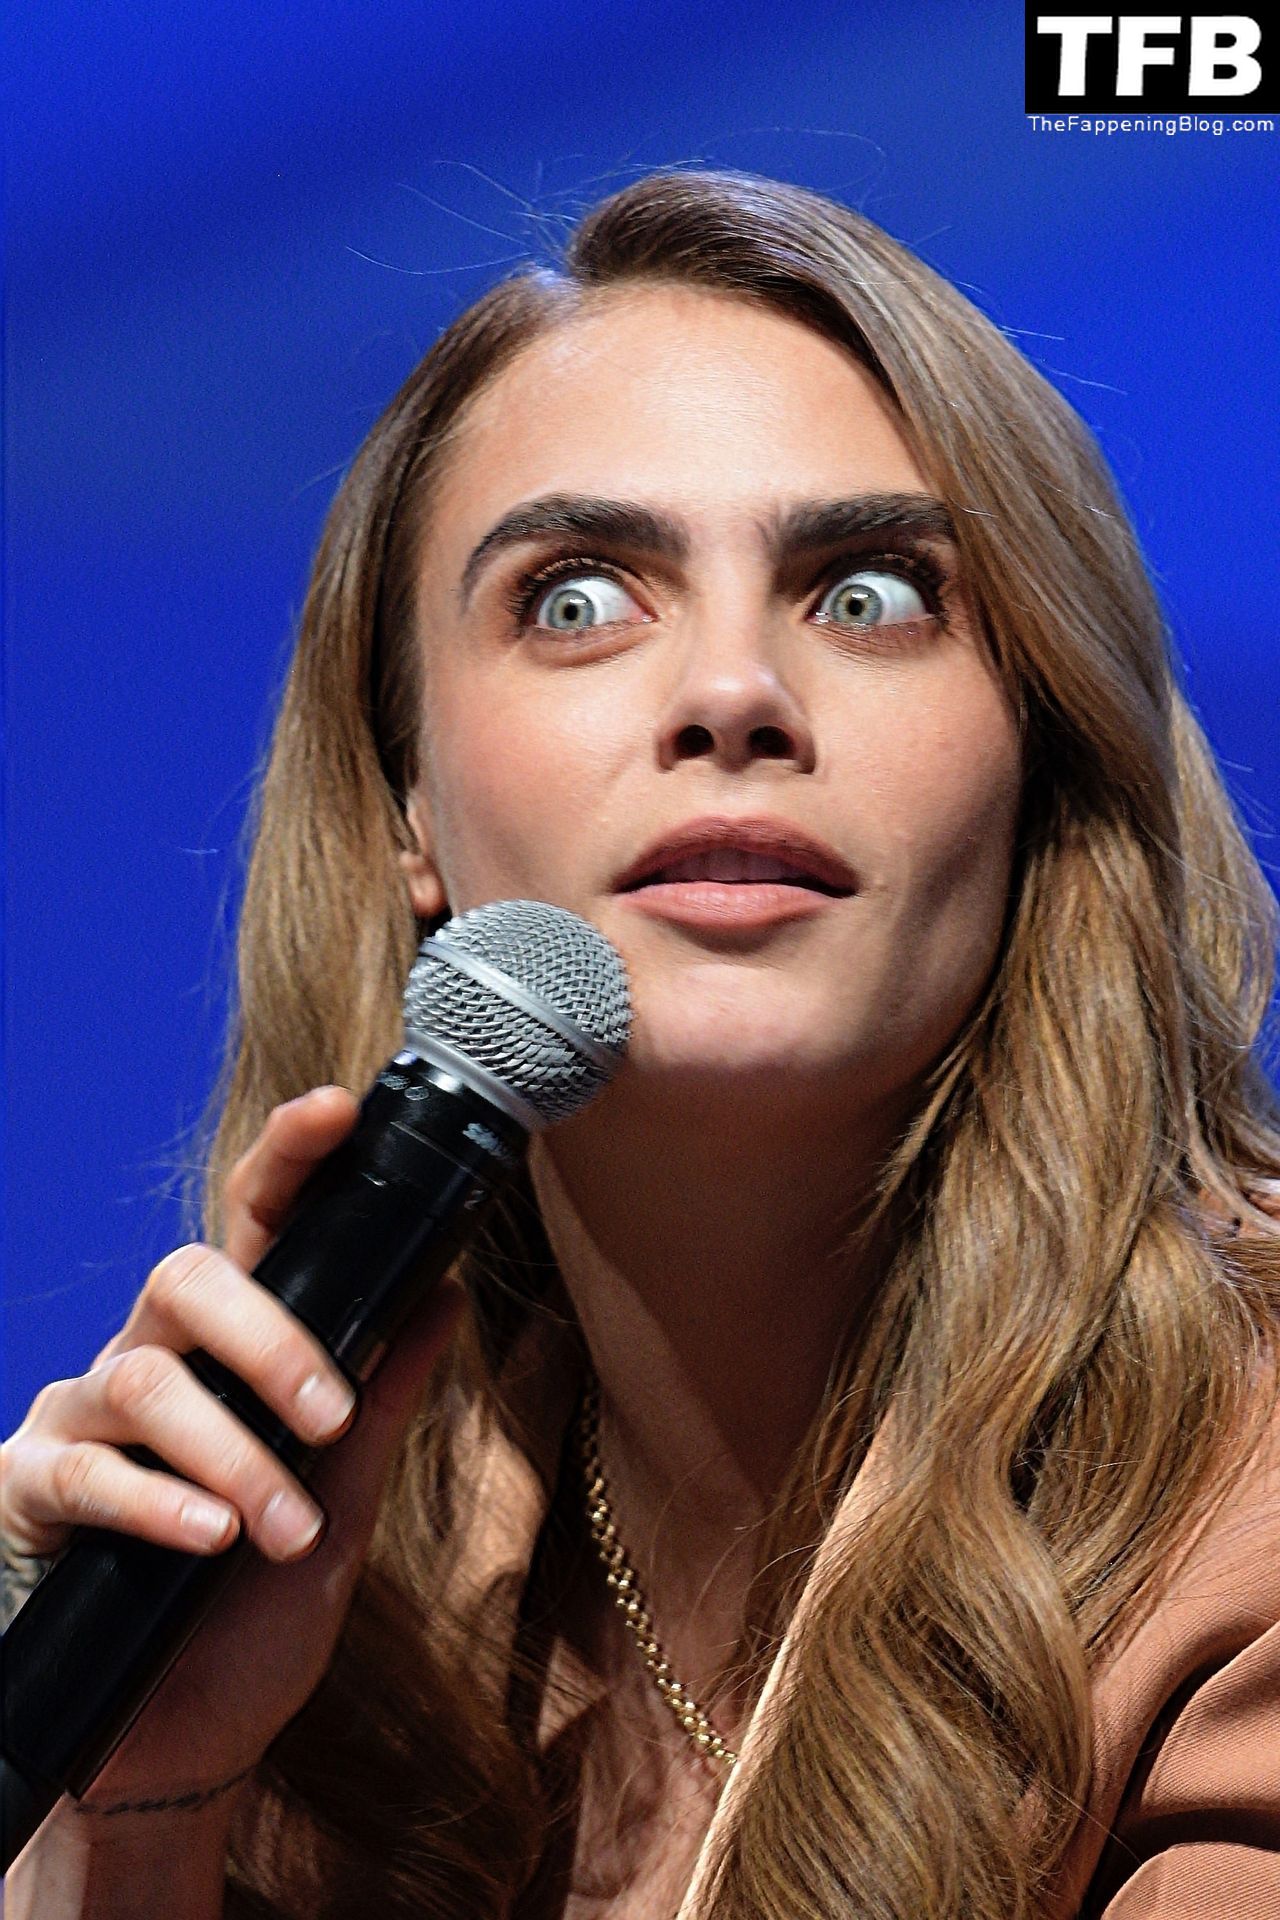 Cara-Delevingne-Sexy-The-Fappening-Blog-28-2.jpg